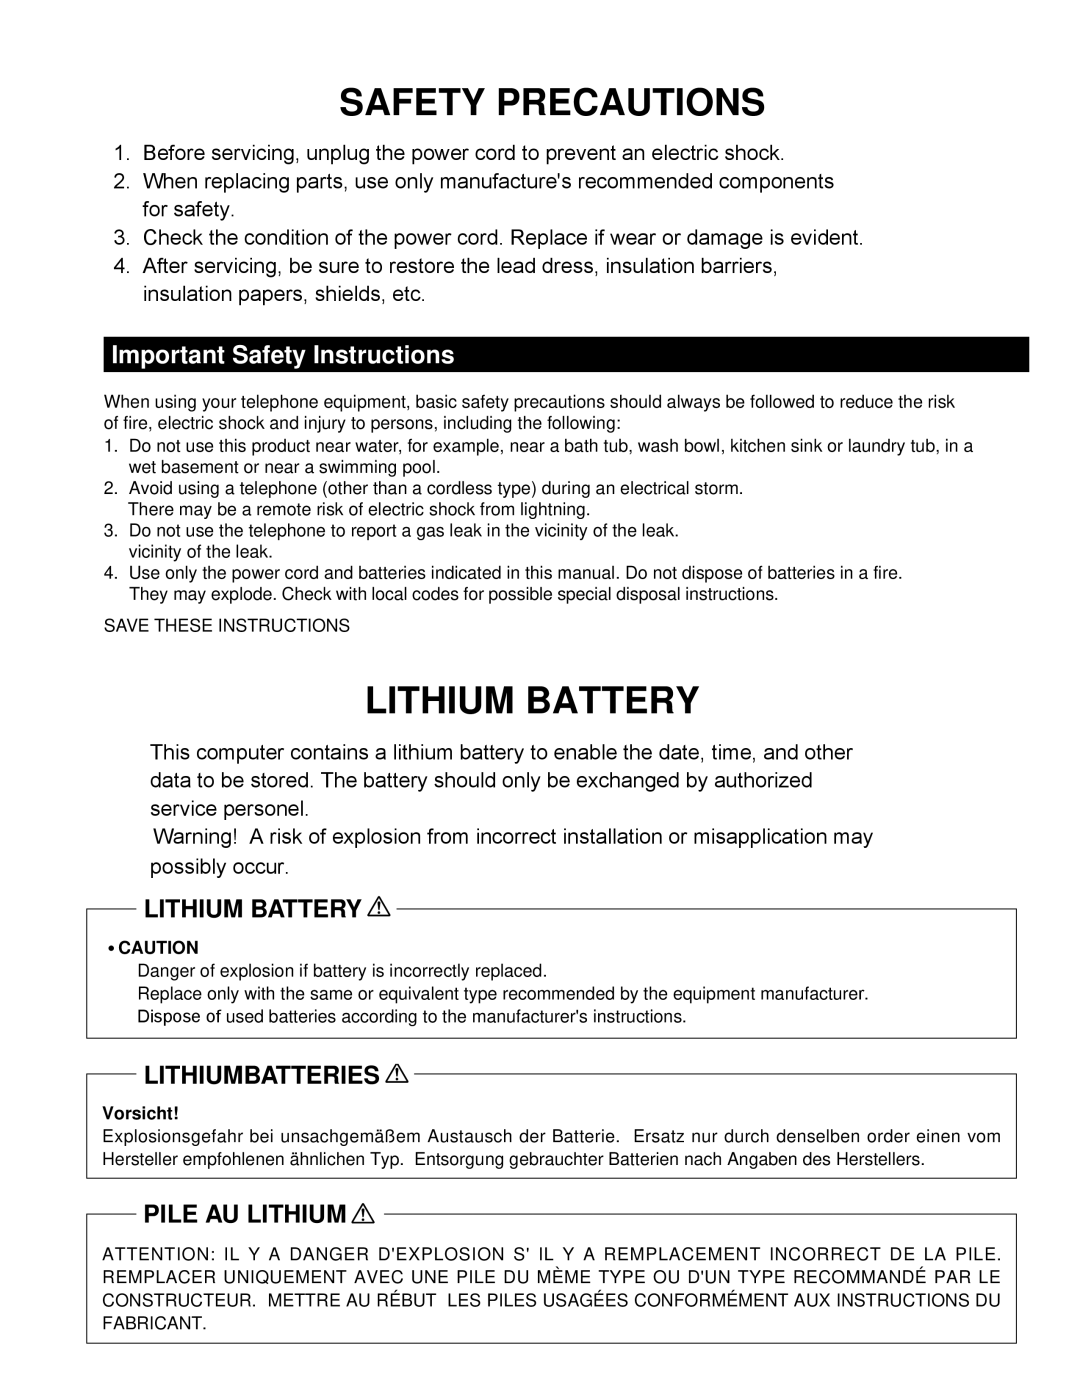 Panasonic CF-52EKM 1 D 2 M Safety Precautions, Lithium Battery, Important Safety Instructions, Lithiumbatteries 